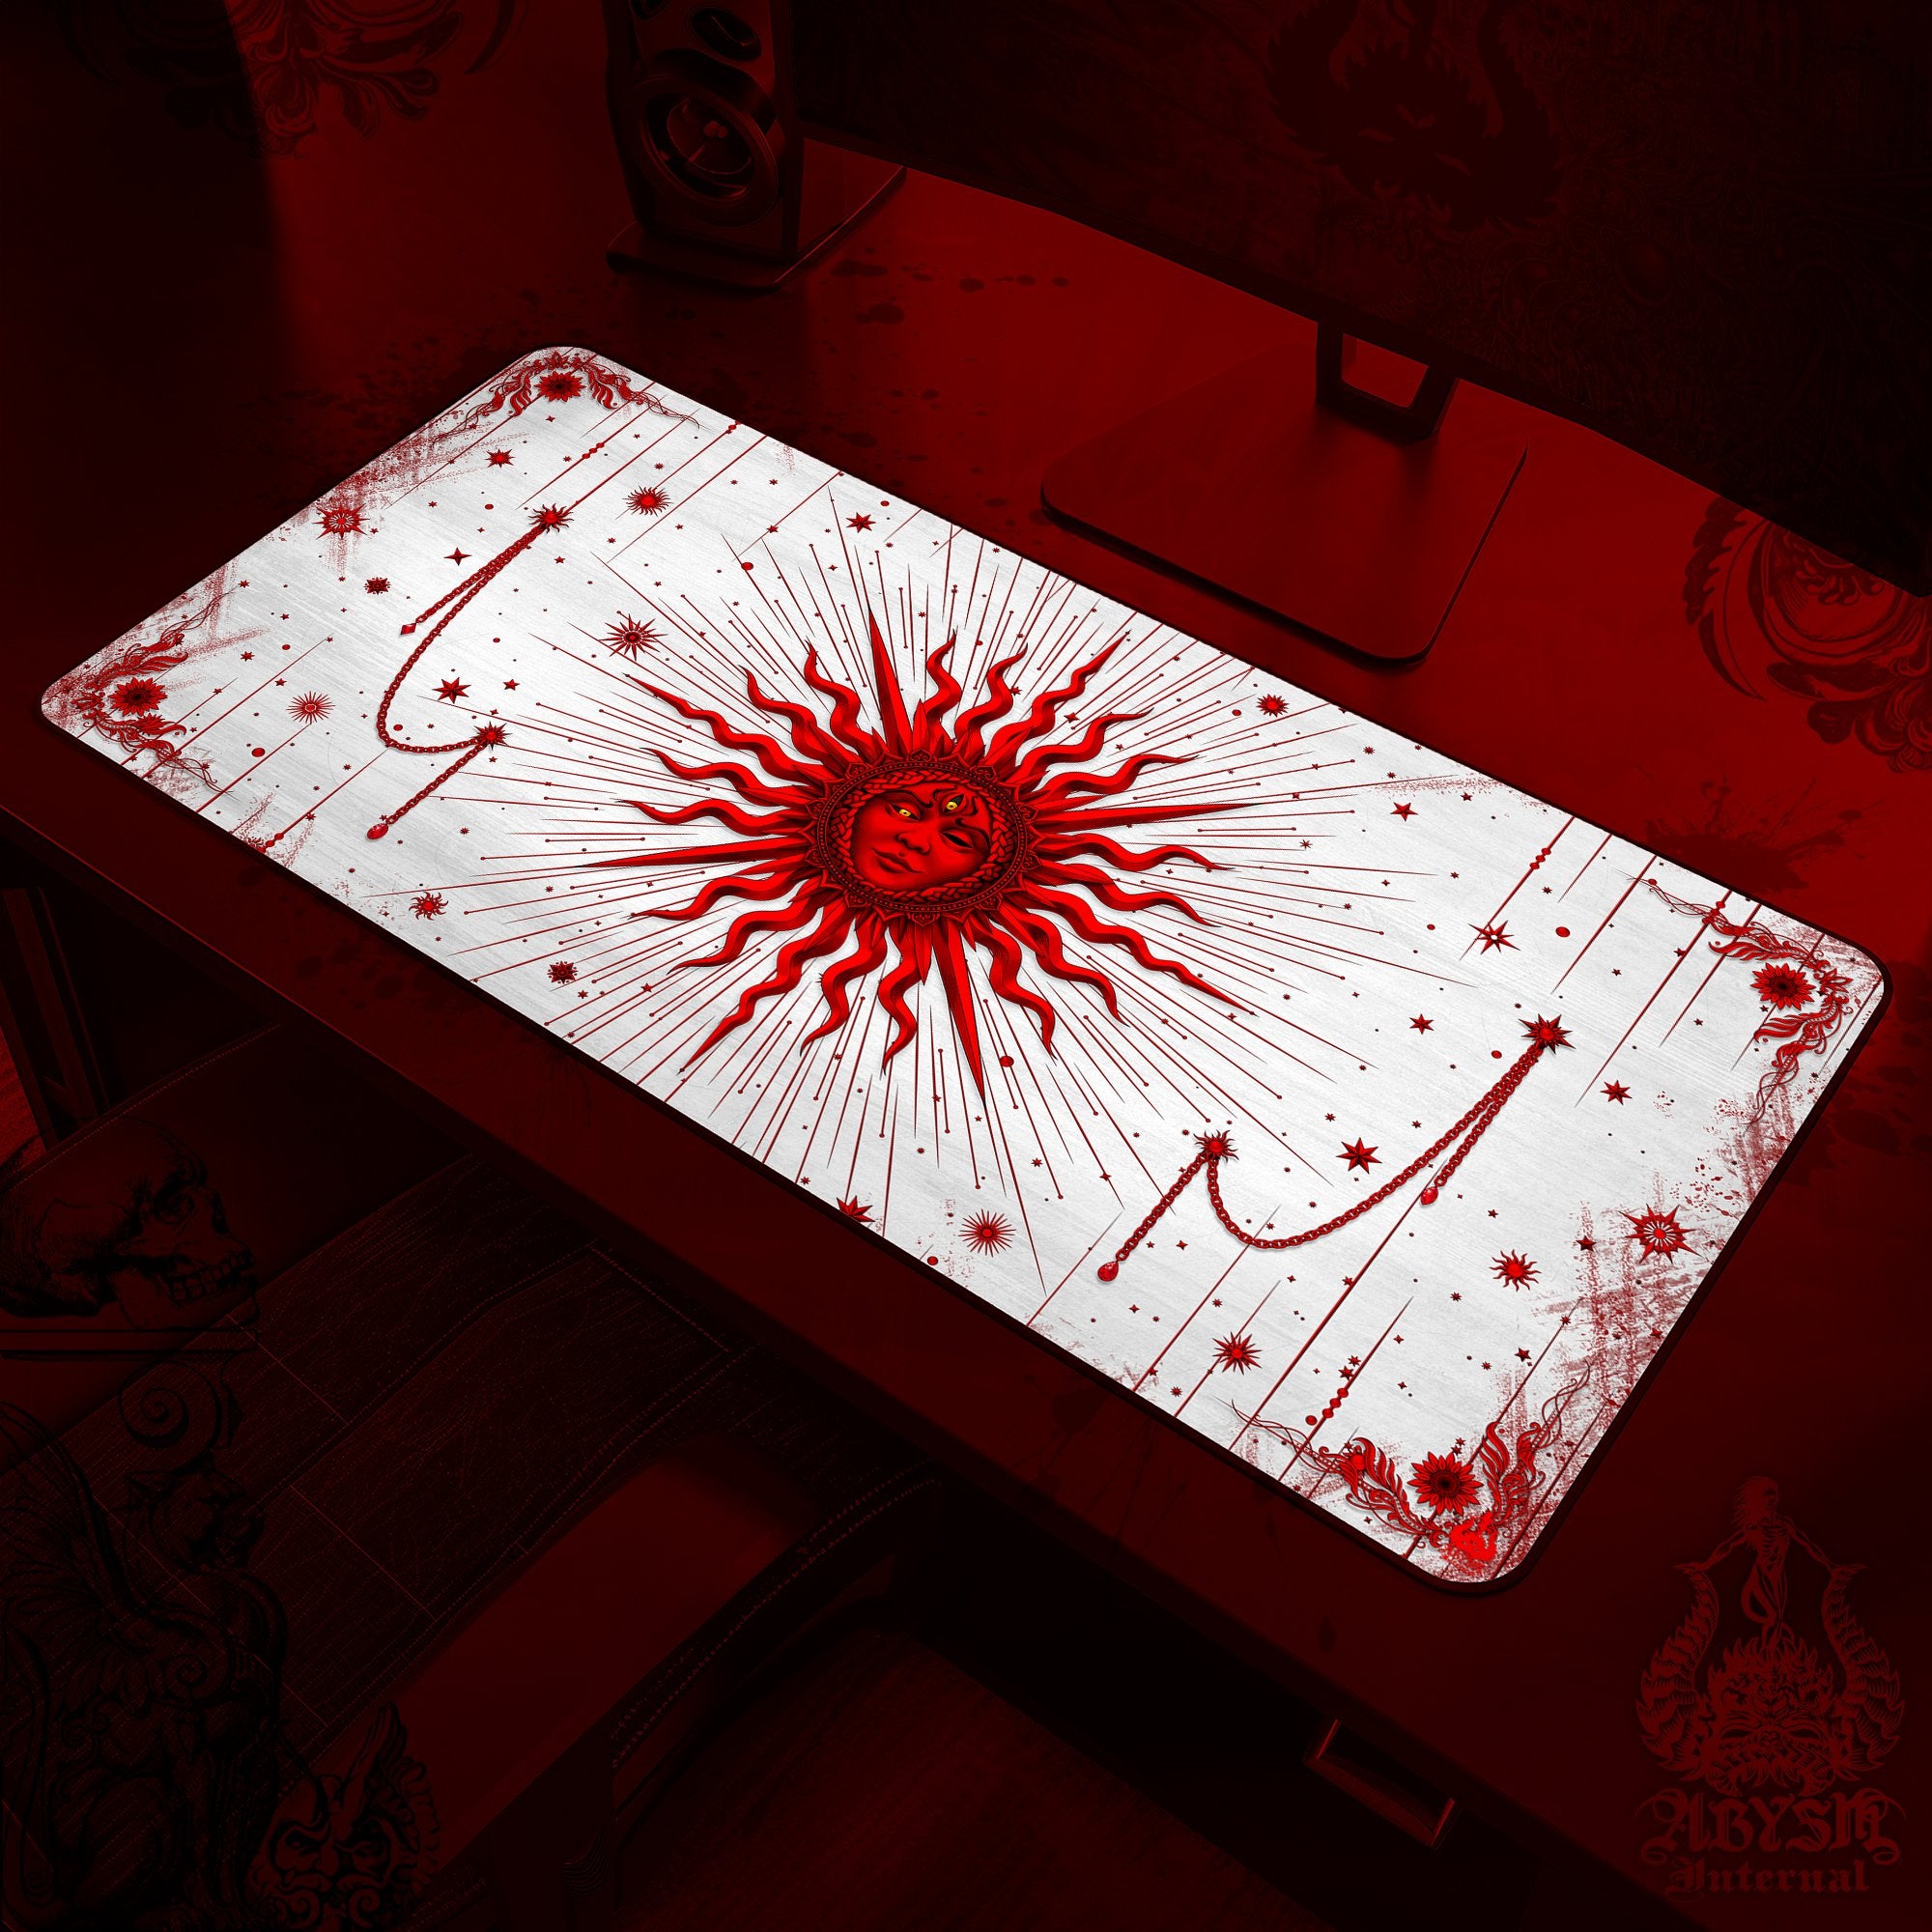 Red Sun Mouse Pad, White Goth Gaming Desk Mat, Tarot Arcana Workpad, Witch Table Protector Cover, Esoteric Art Print - Abysm Internal